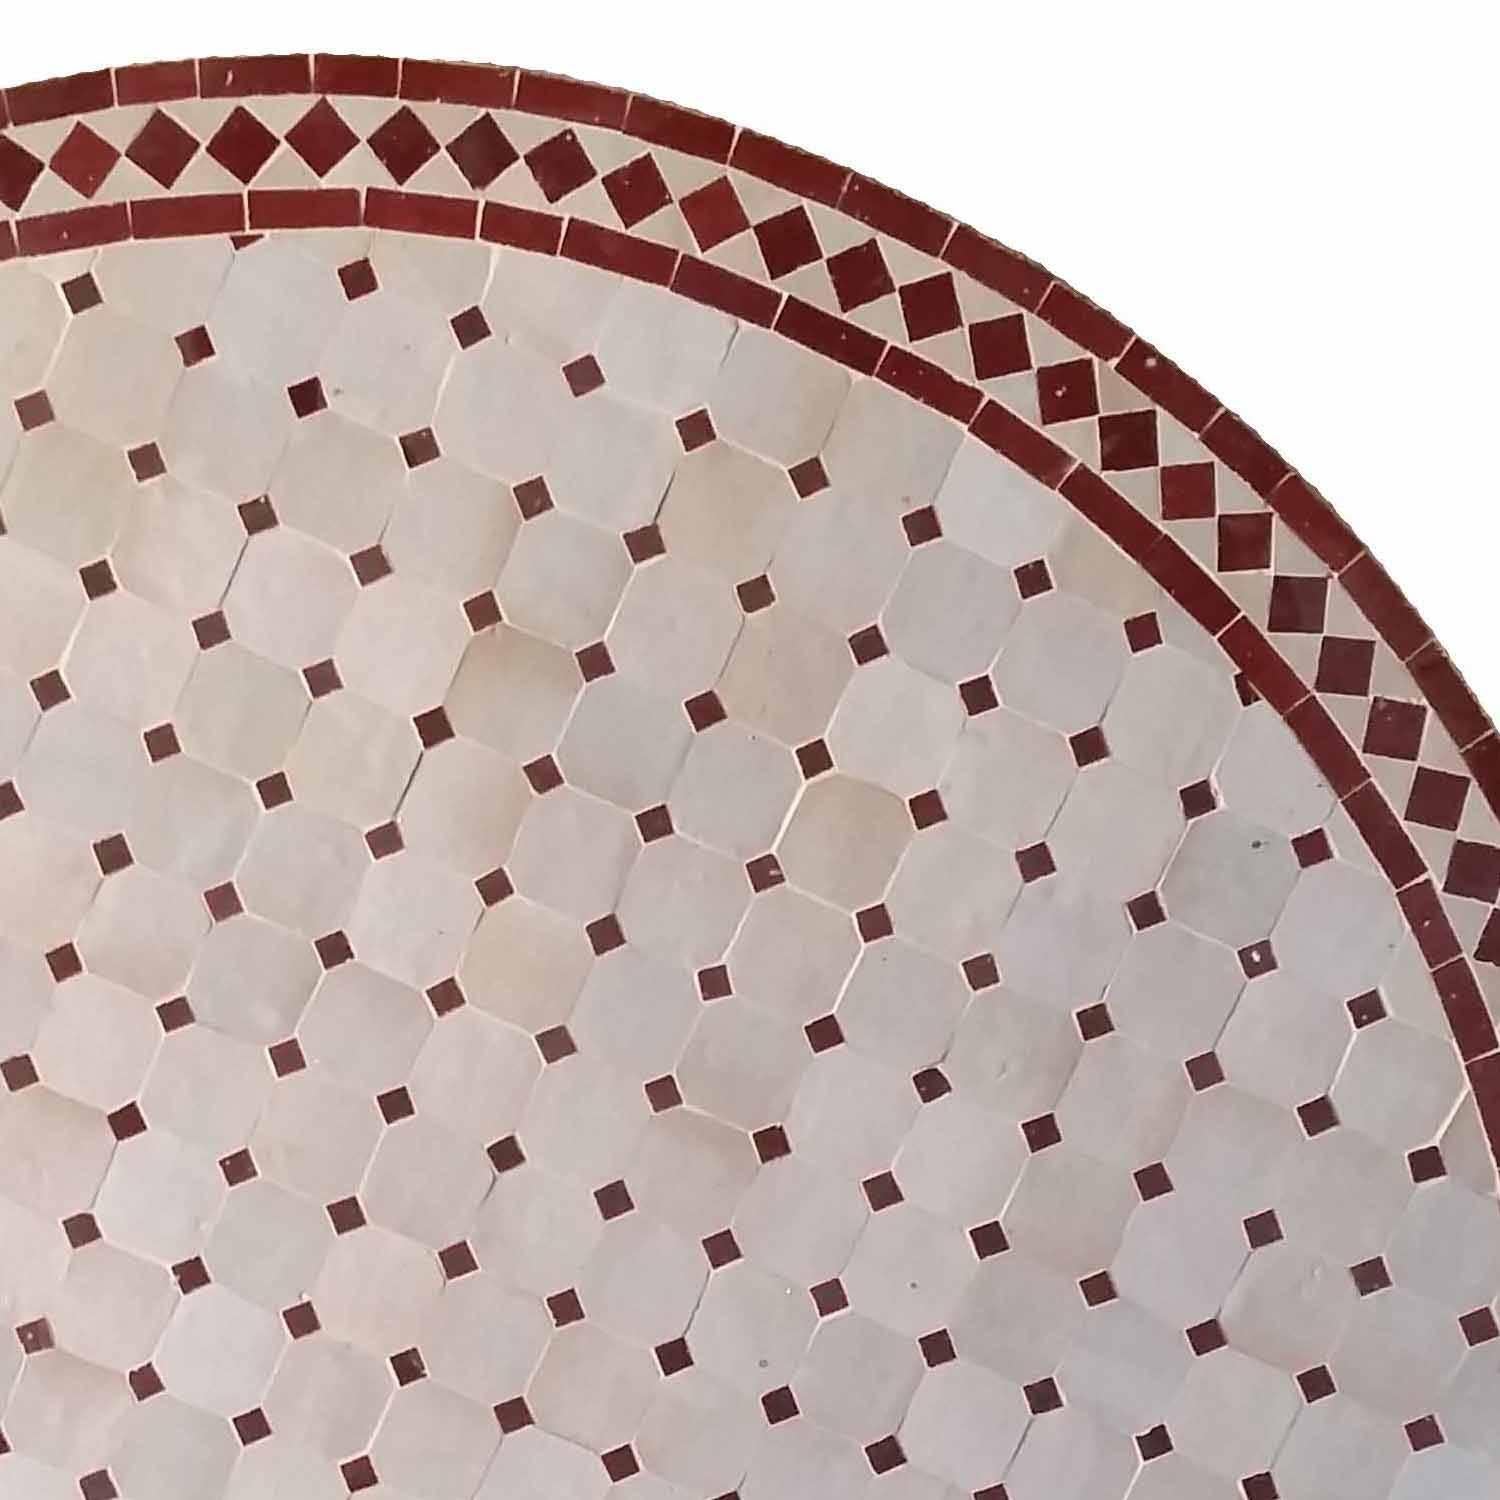 Round Moroccan Mosaic Table, Natural / Burgundy In Excellent Condition For Sale In Orlando, FL